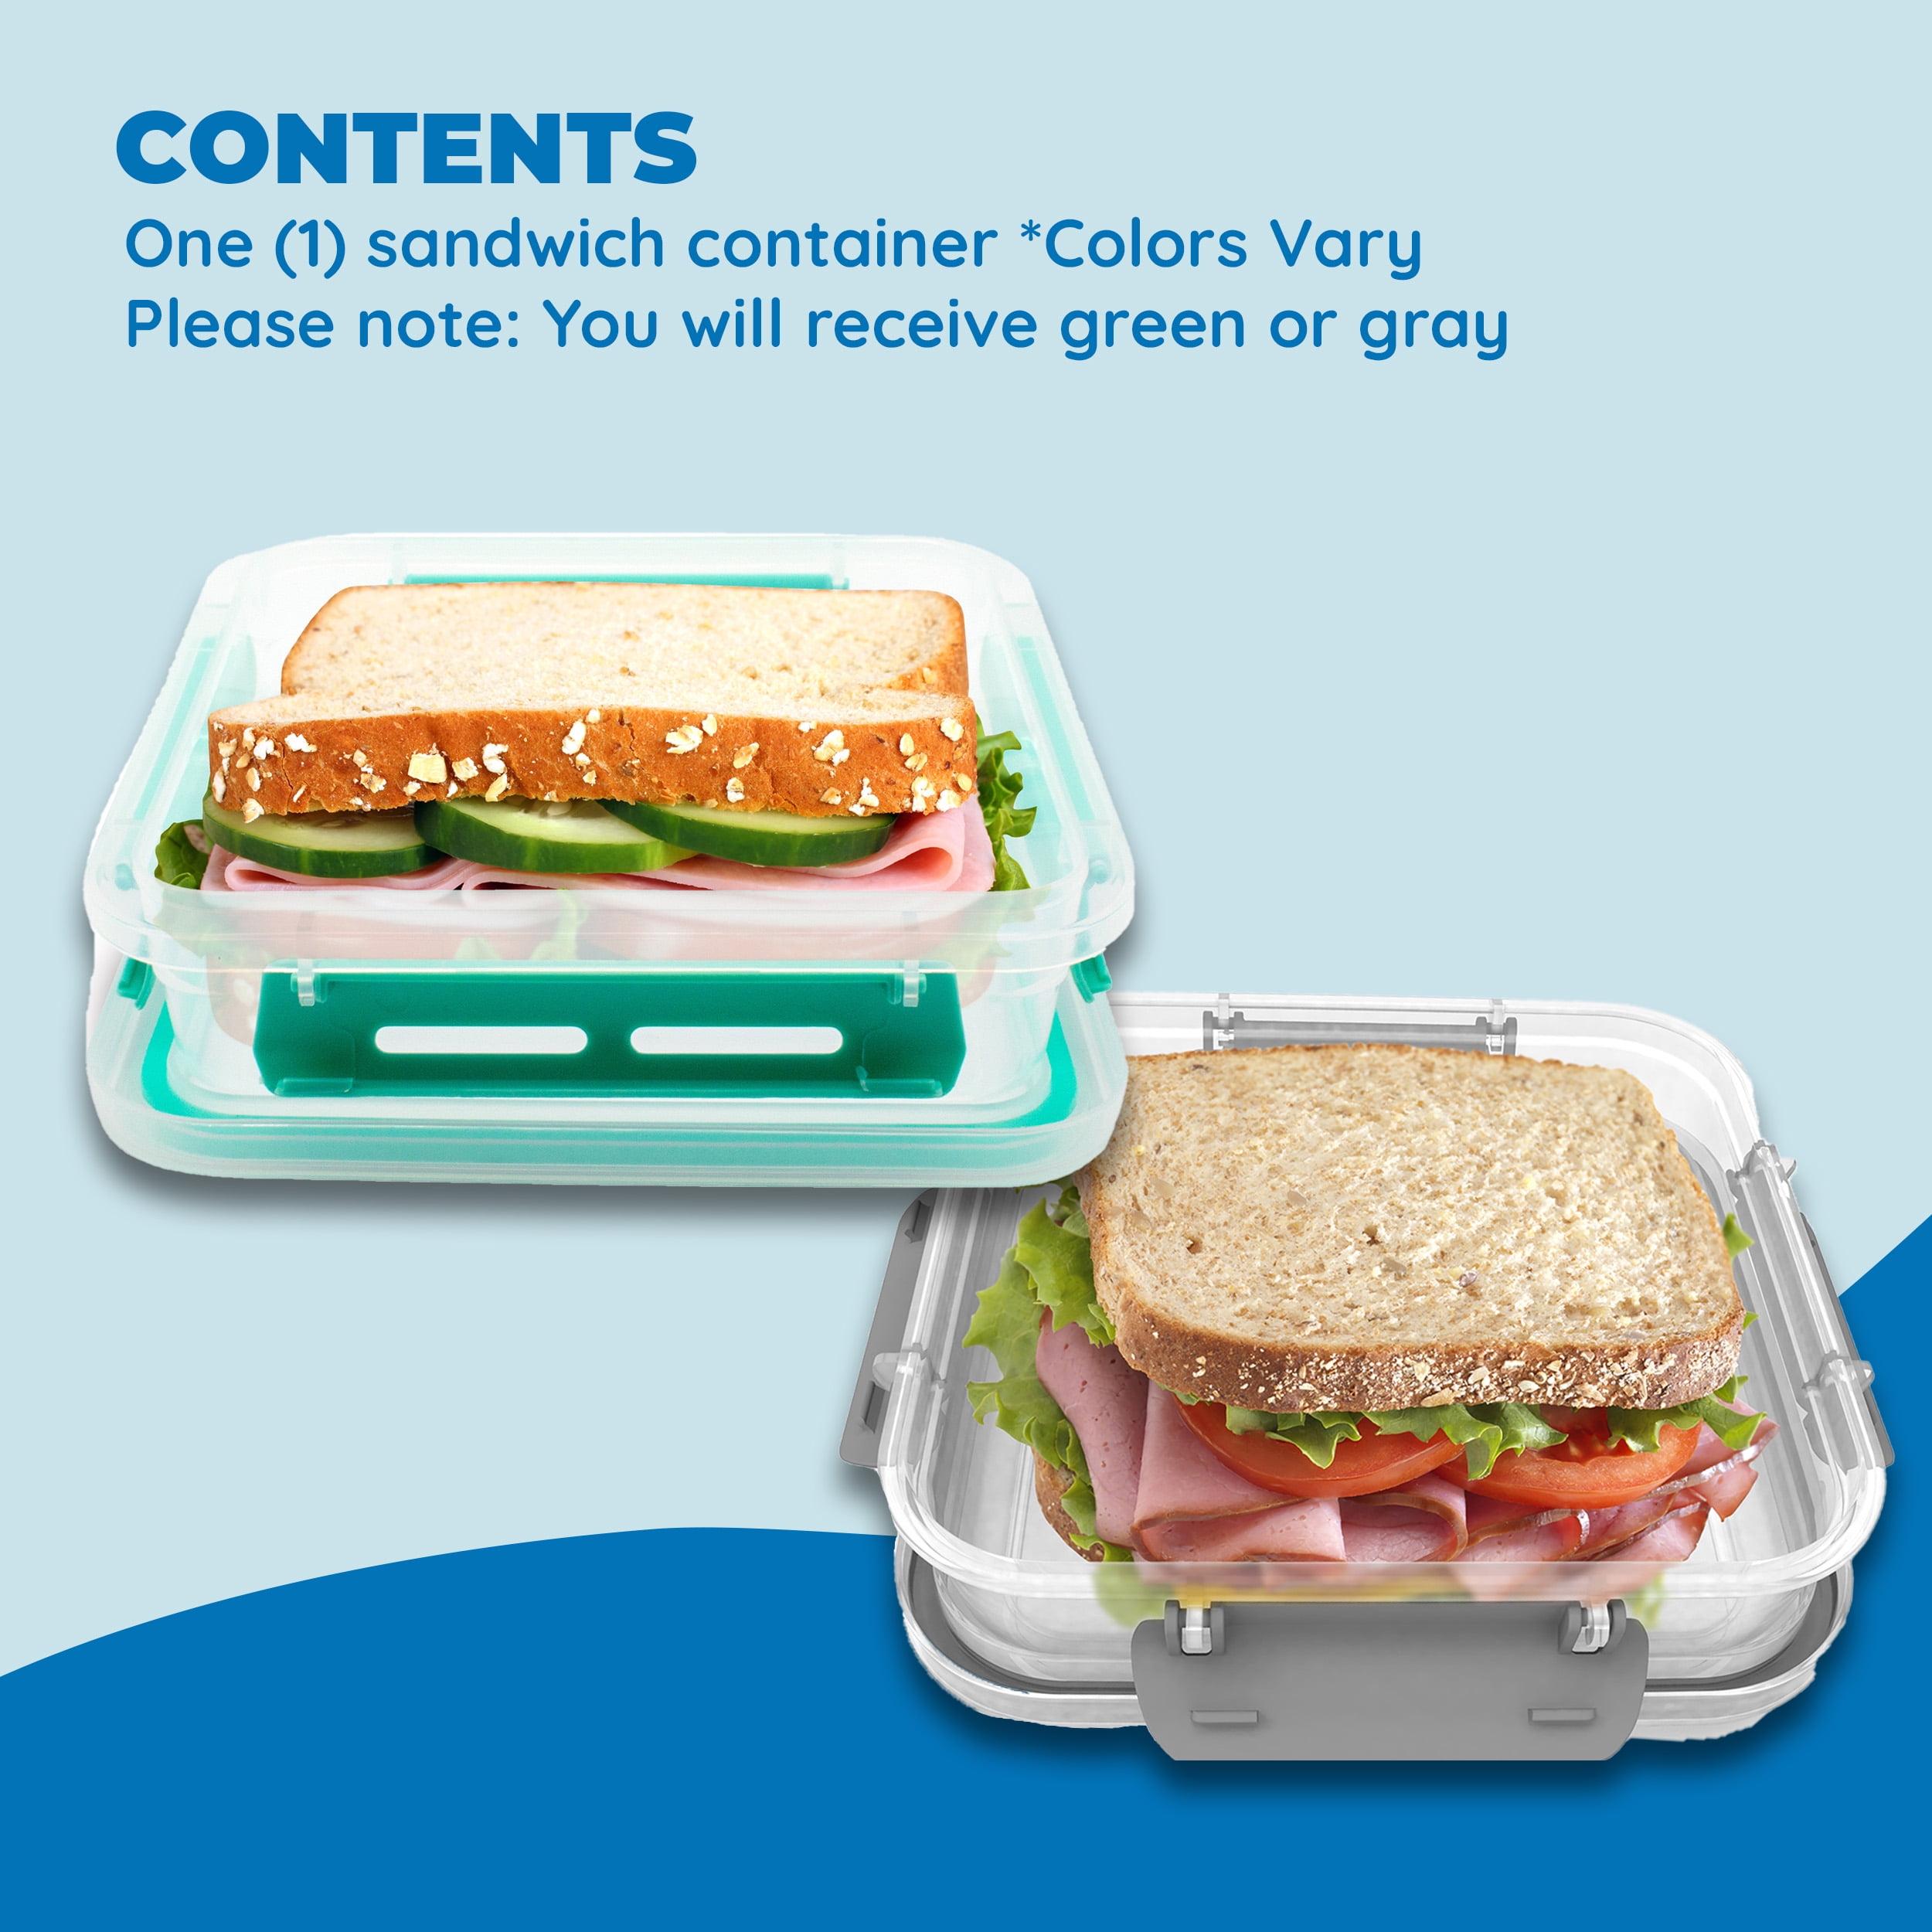 SDJMa Sandwich Containers 5x5, Sandwich Lunch Box with Lid, Portable  Sandwich Box for Office School Work Outdoor Picnic, BPA Free, Microwave 